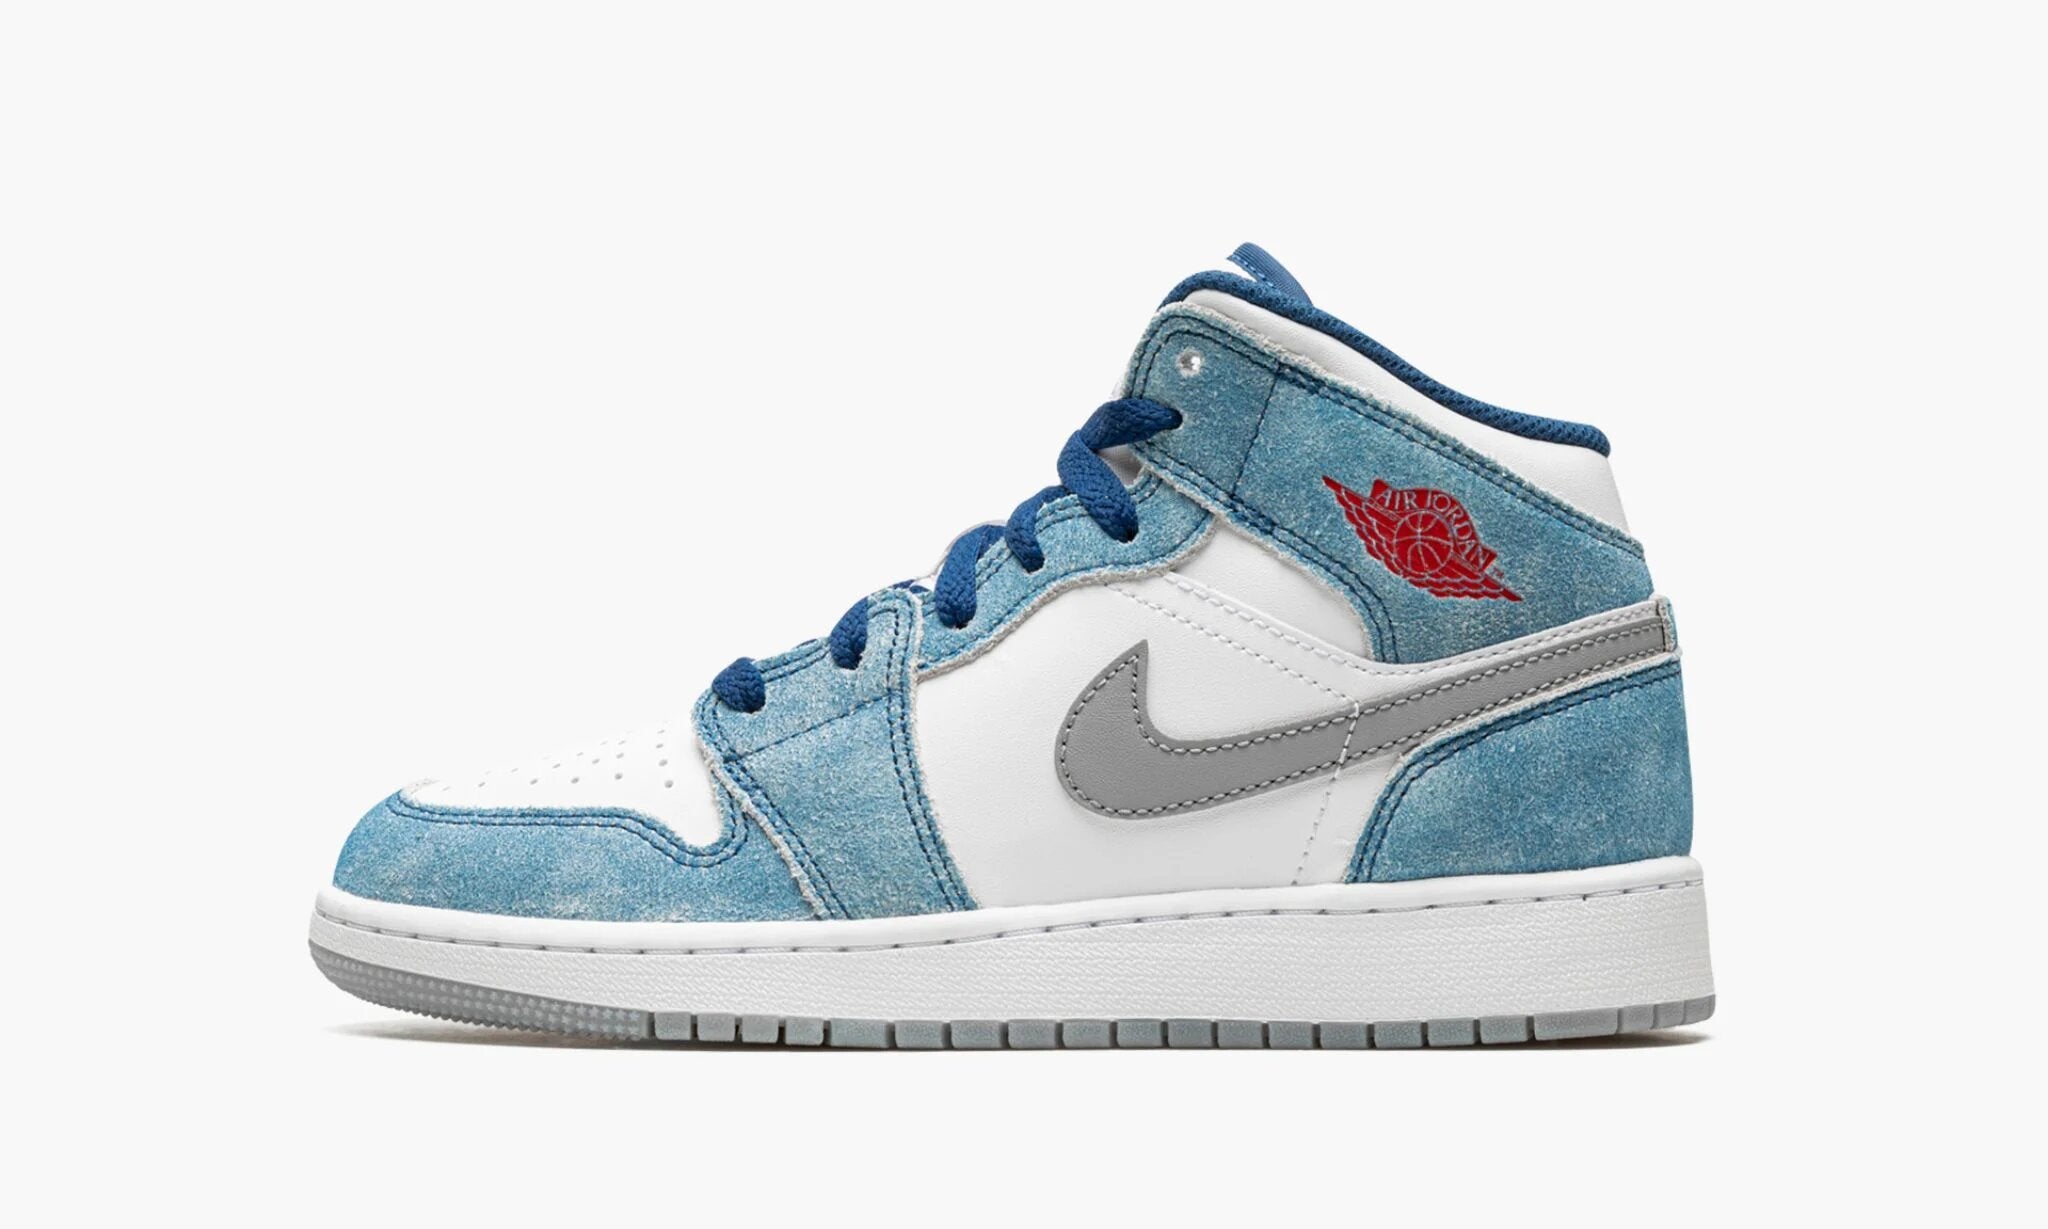 constante es bonito R Nike Air Jordan 1 Mid SE French Blue Light Steel (GS) - DR6235 401 -  Archive Sneakers